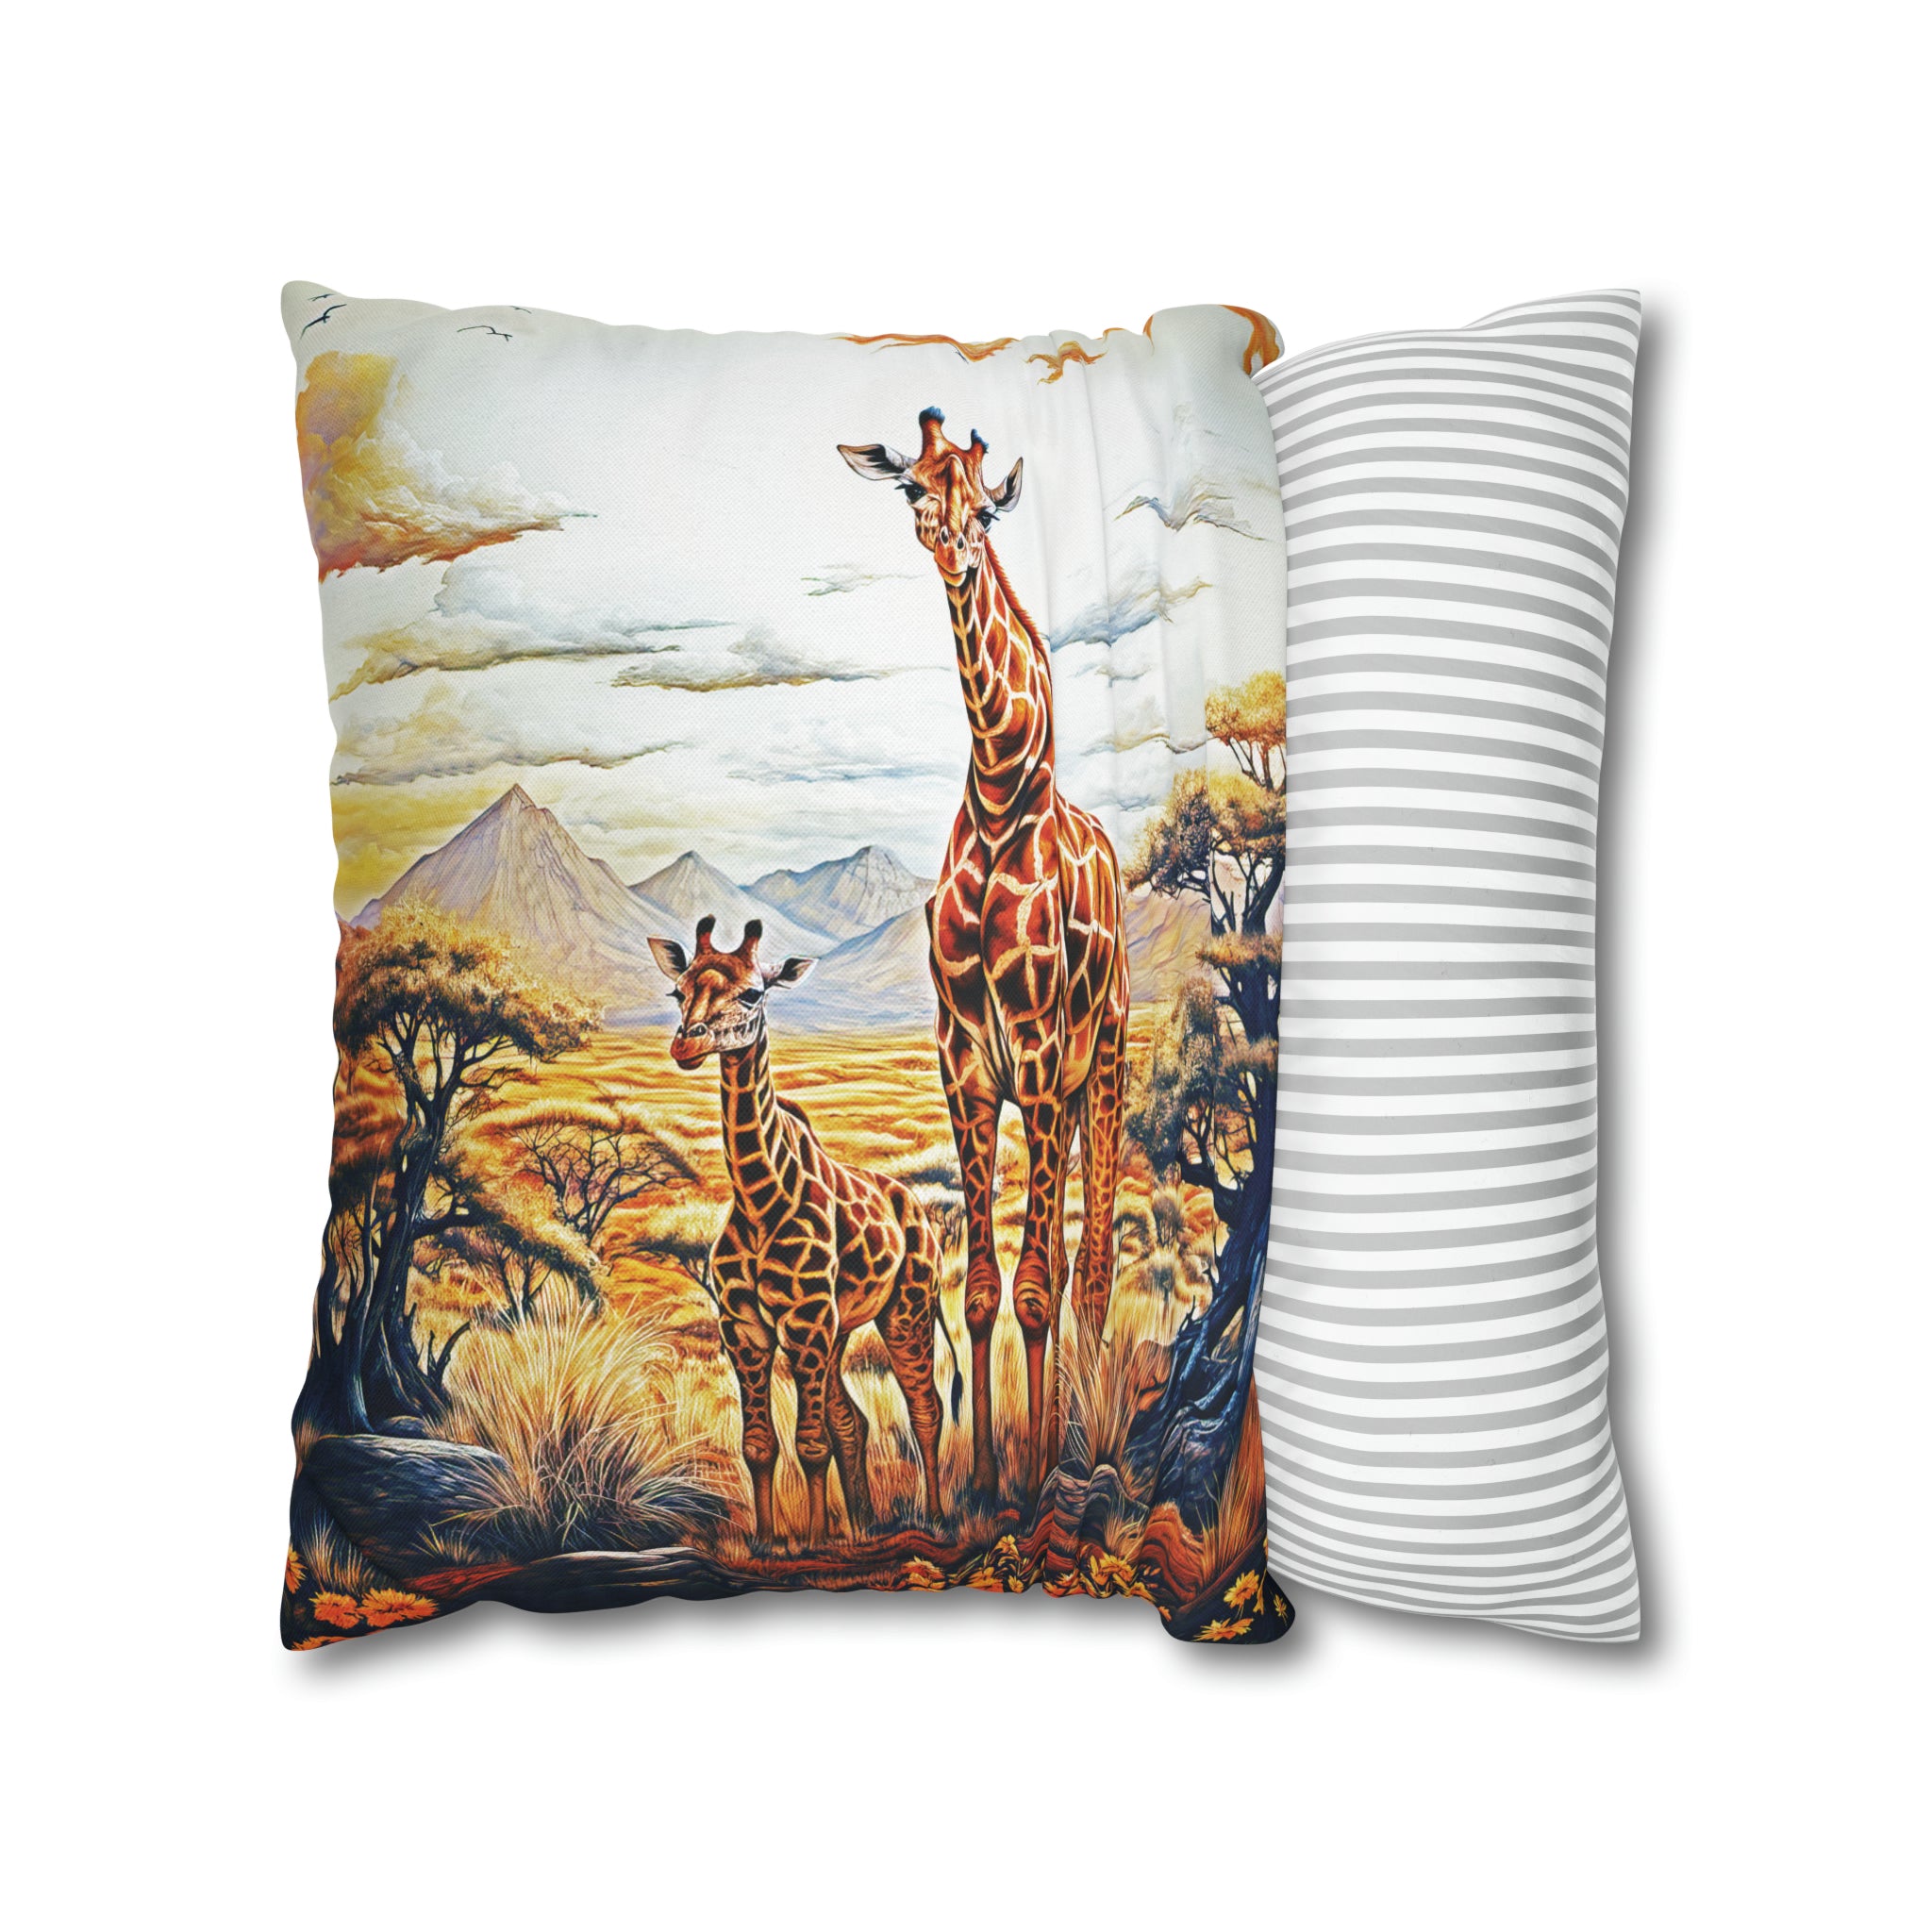 Square Pillow Case 18" x 18", CASE ONLY, no pillow form, original Art ,Colorful, A Mother Giraffe and Her Calf on the African Plain